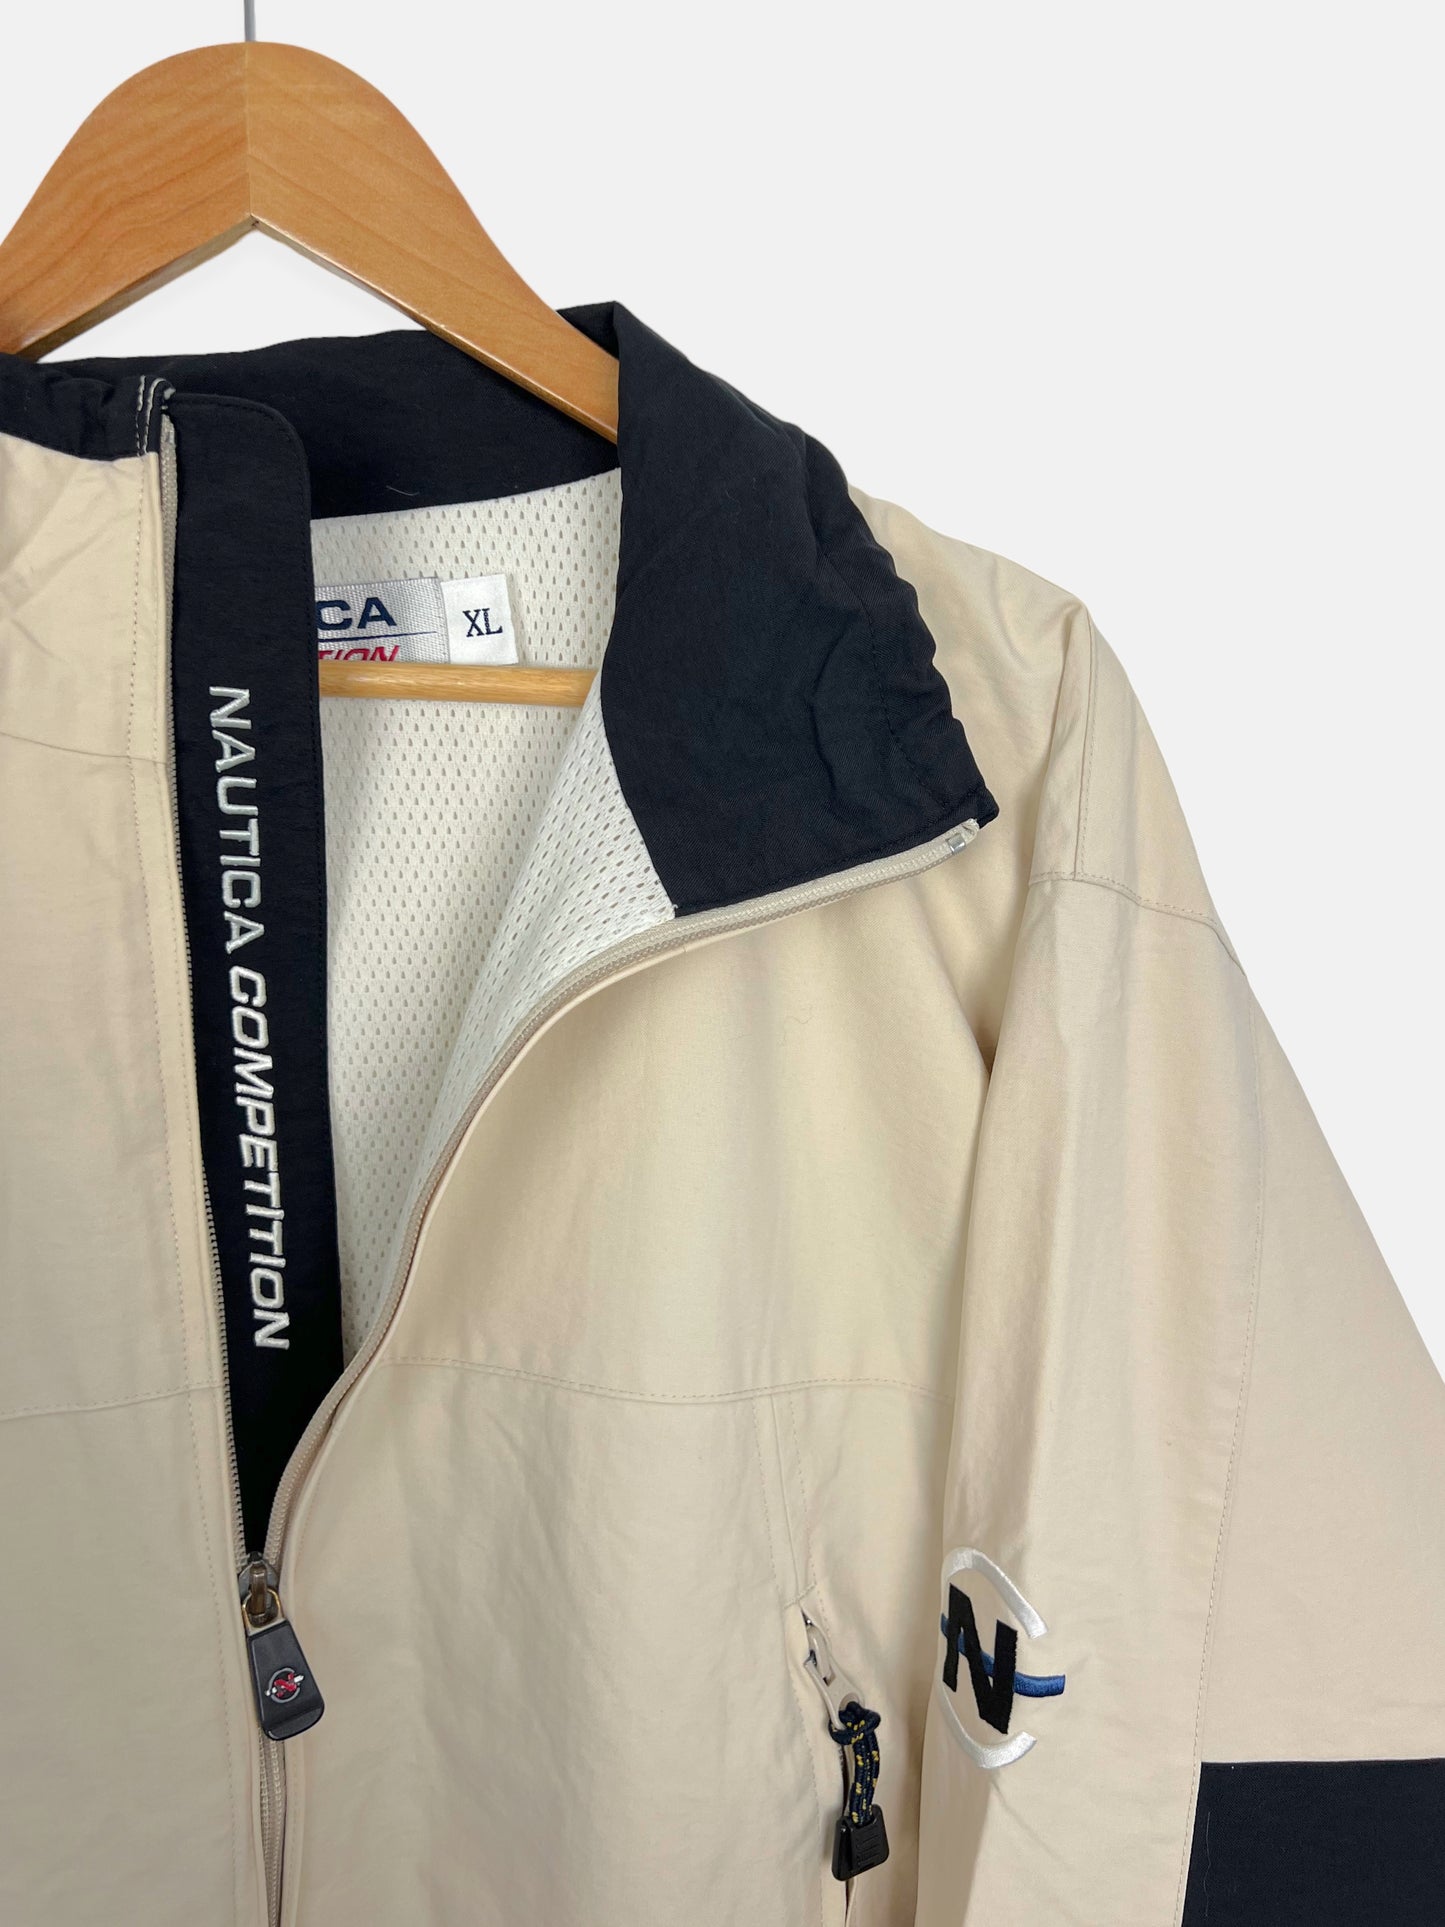 90'a Nautica Competition Embroidered Vintage Jacket Size L-XL